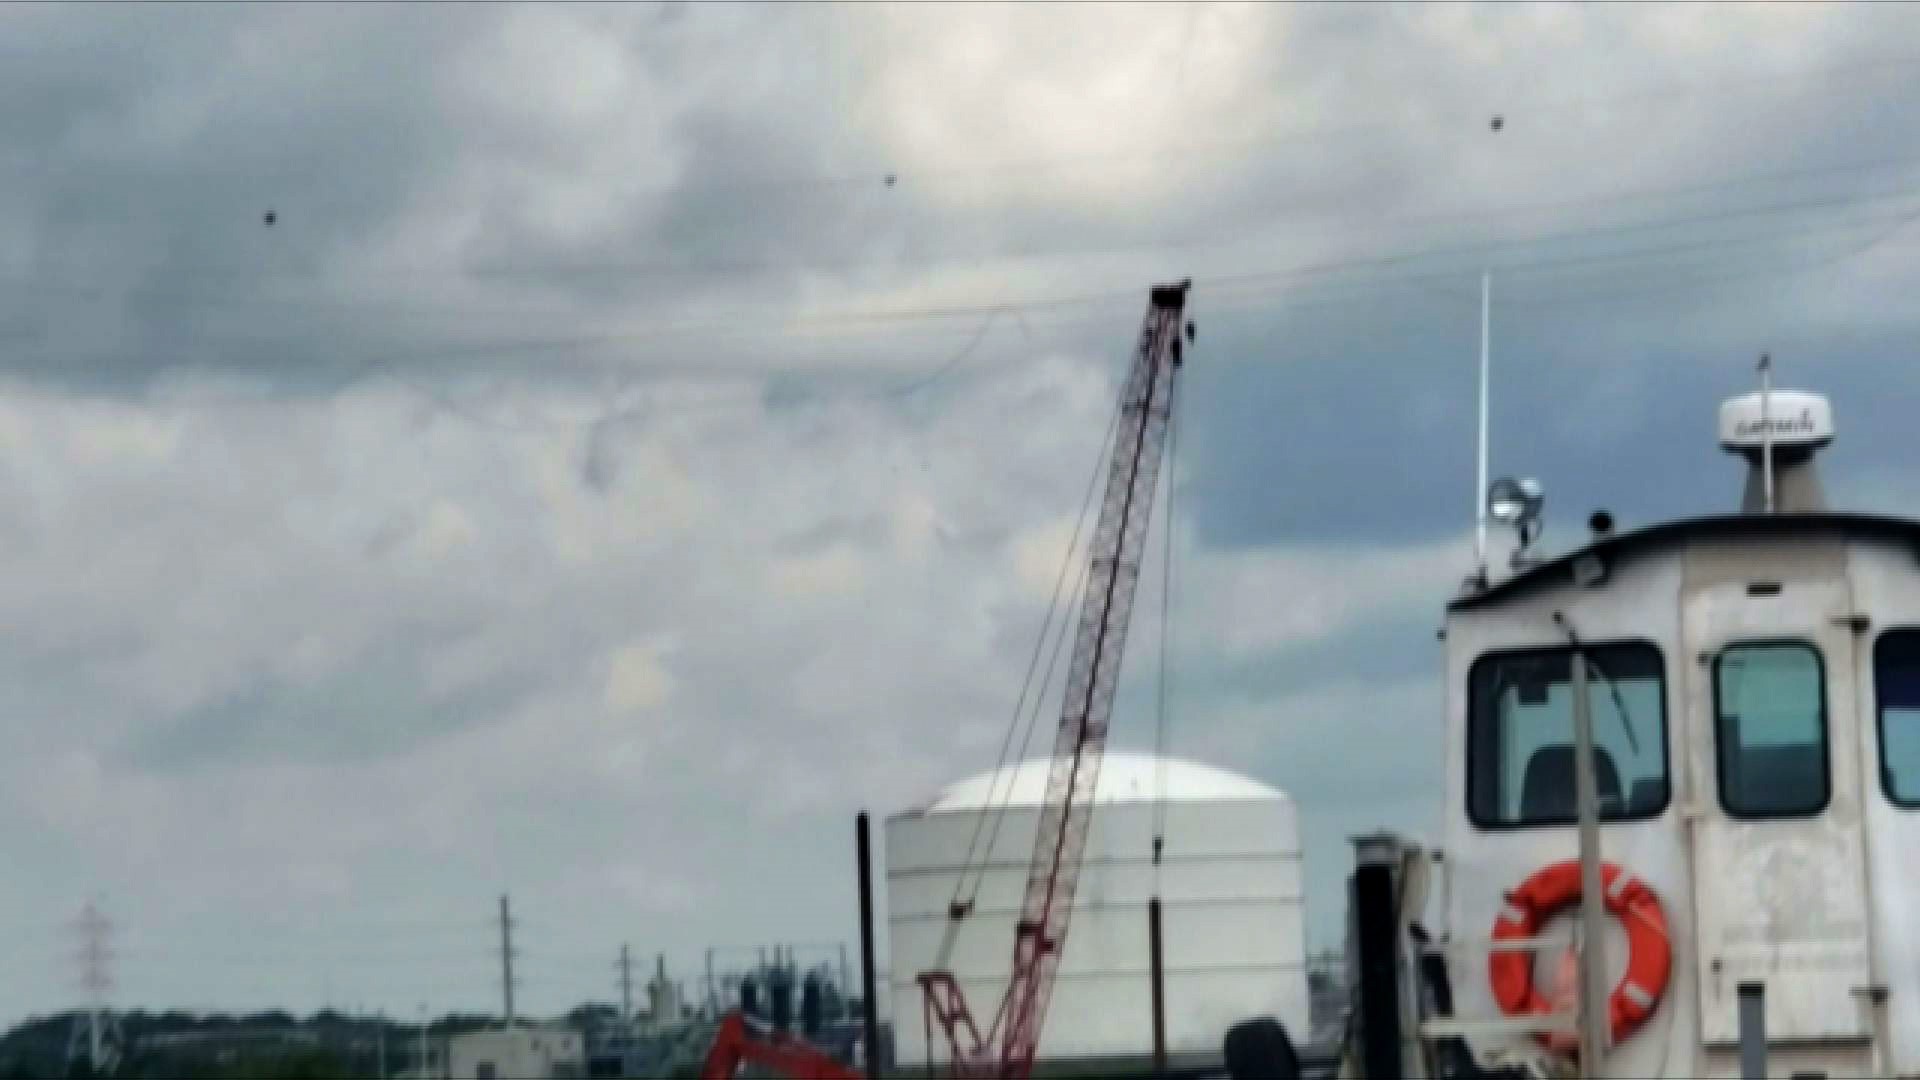 Cell phone video captures the moment a crane on a barge hits and knocks down power lines while going down the Elizabeth River, causing widespread outages in Chesapeake and Virginia Beach.